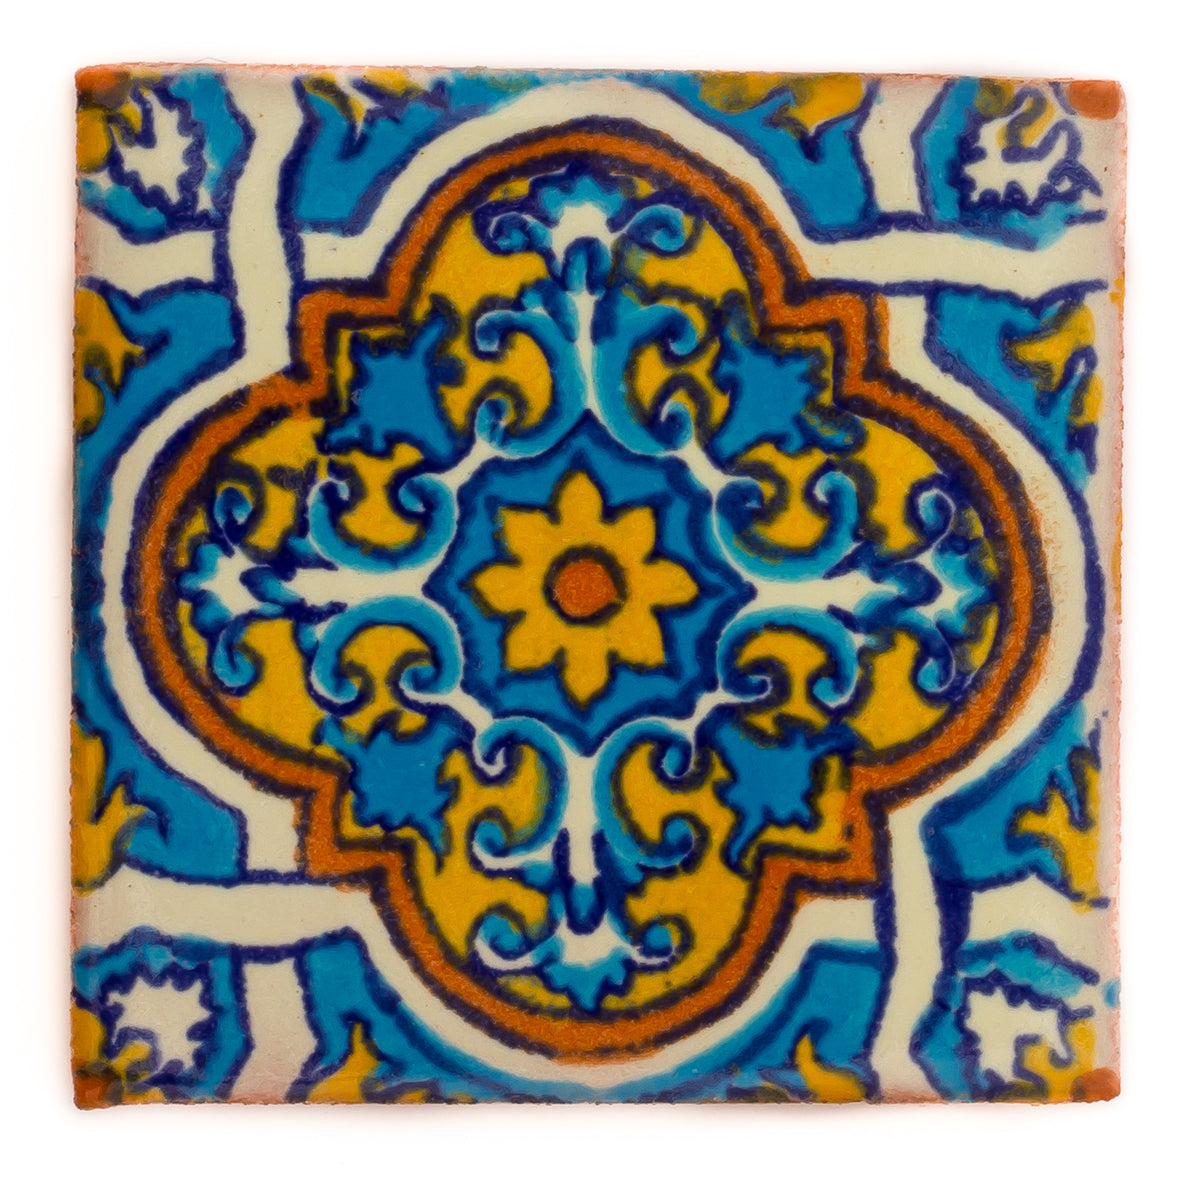 Fairly Traded Hand Painted Ceramic Mexican Tile by Tumia LAC 